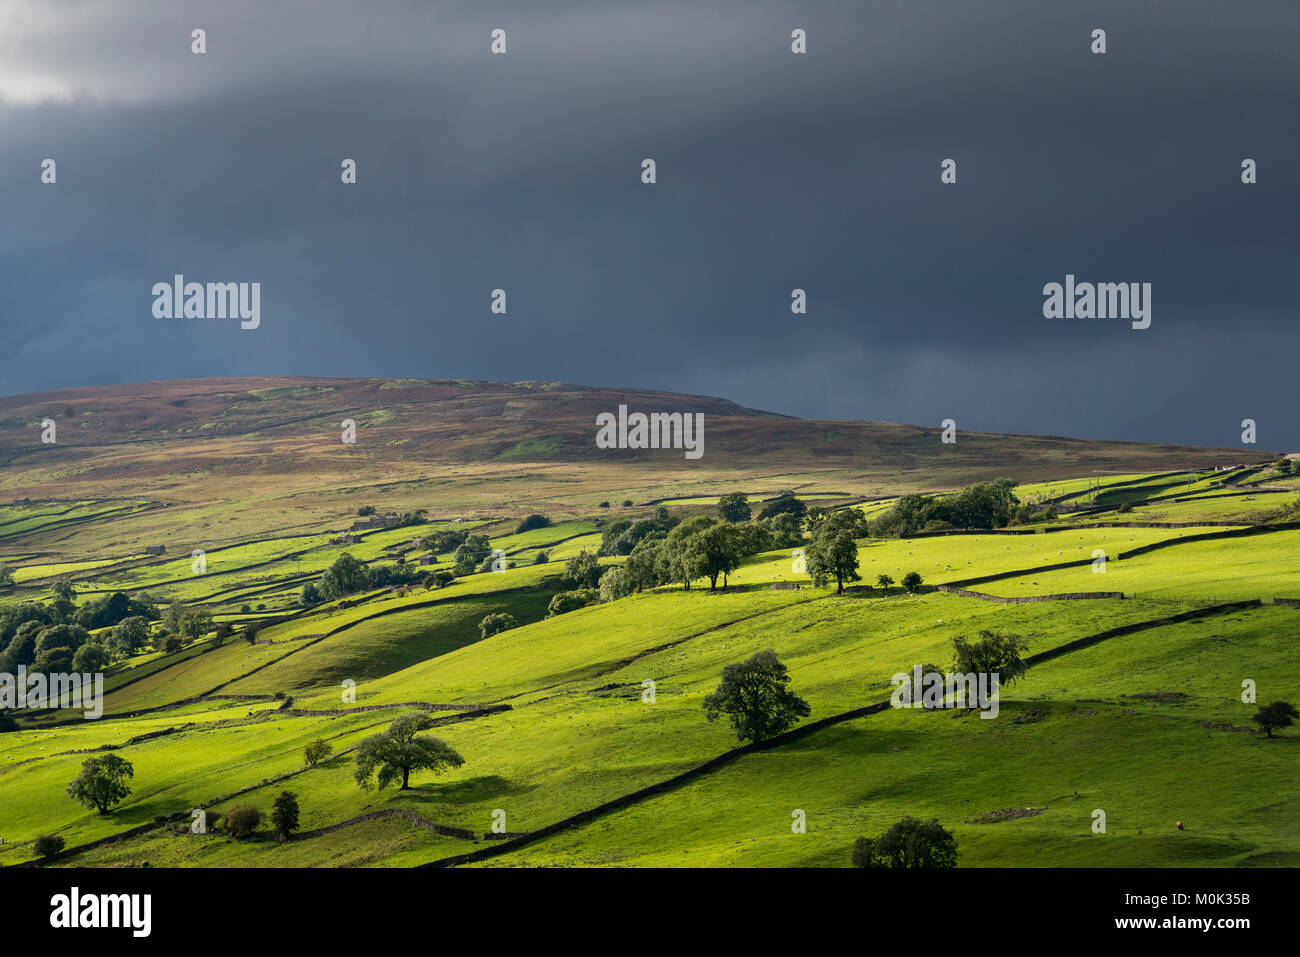 Sunlight on the hills of the Yorkshire Dales under a dark, stormy sky. Reeth, North Yorkshire, England. Stock Photo